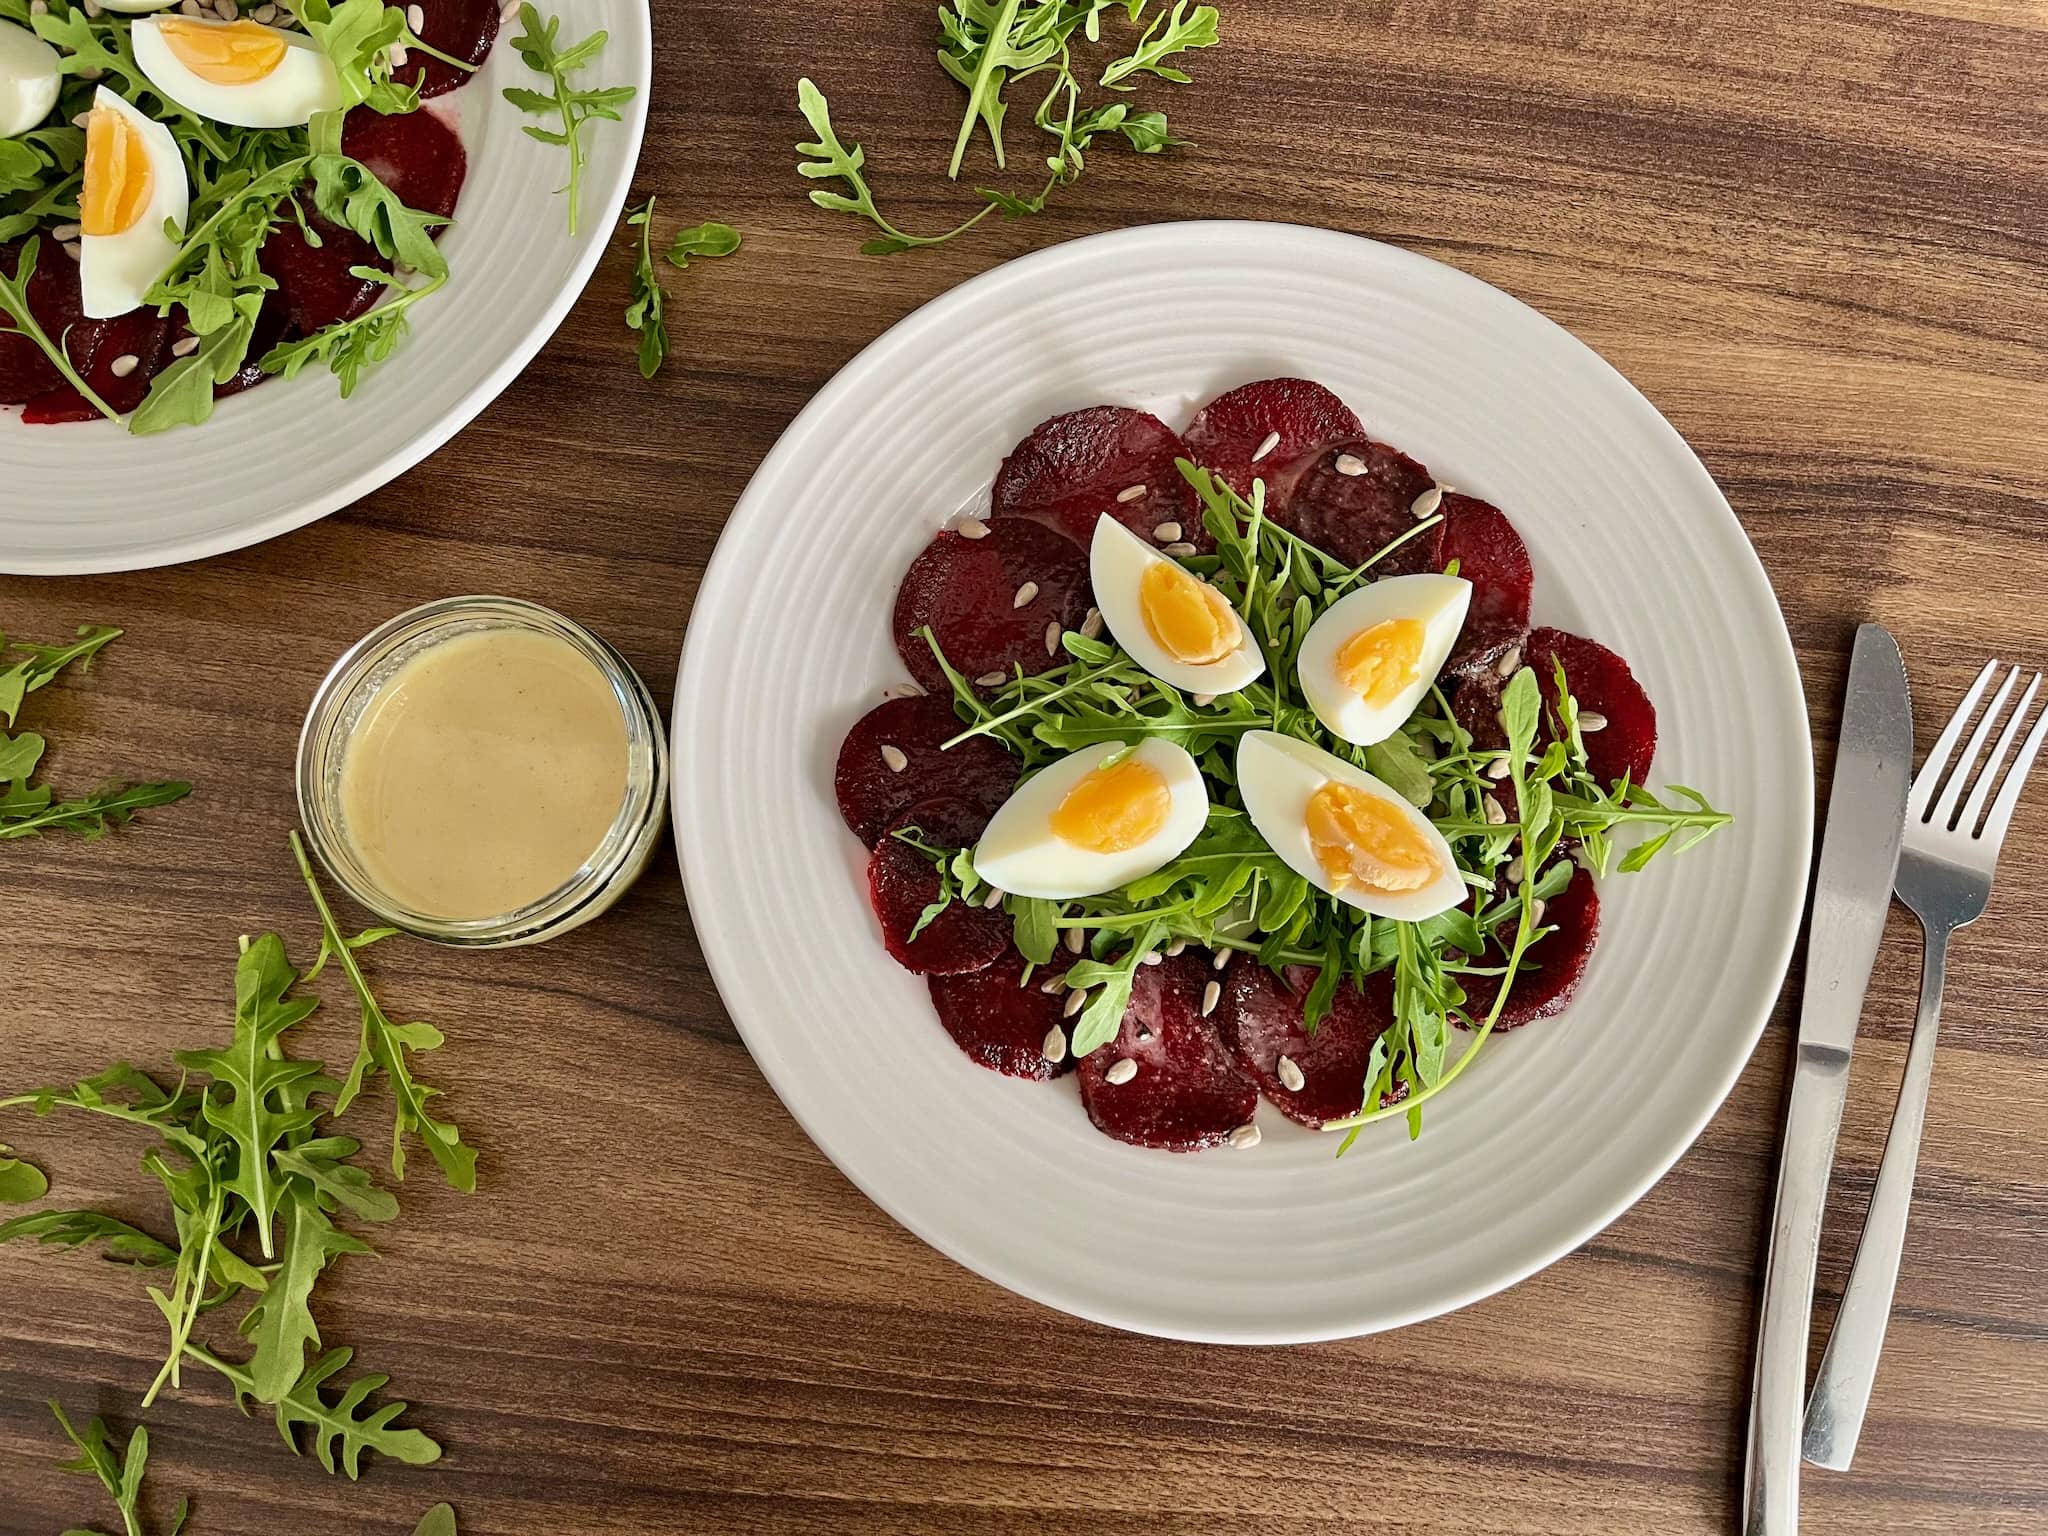 Beetroot Carpaccio on a plate with Wild Rocket leaves and eggs, dressing on a side